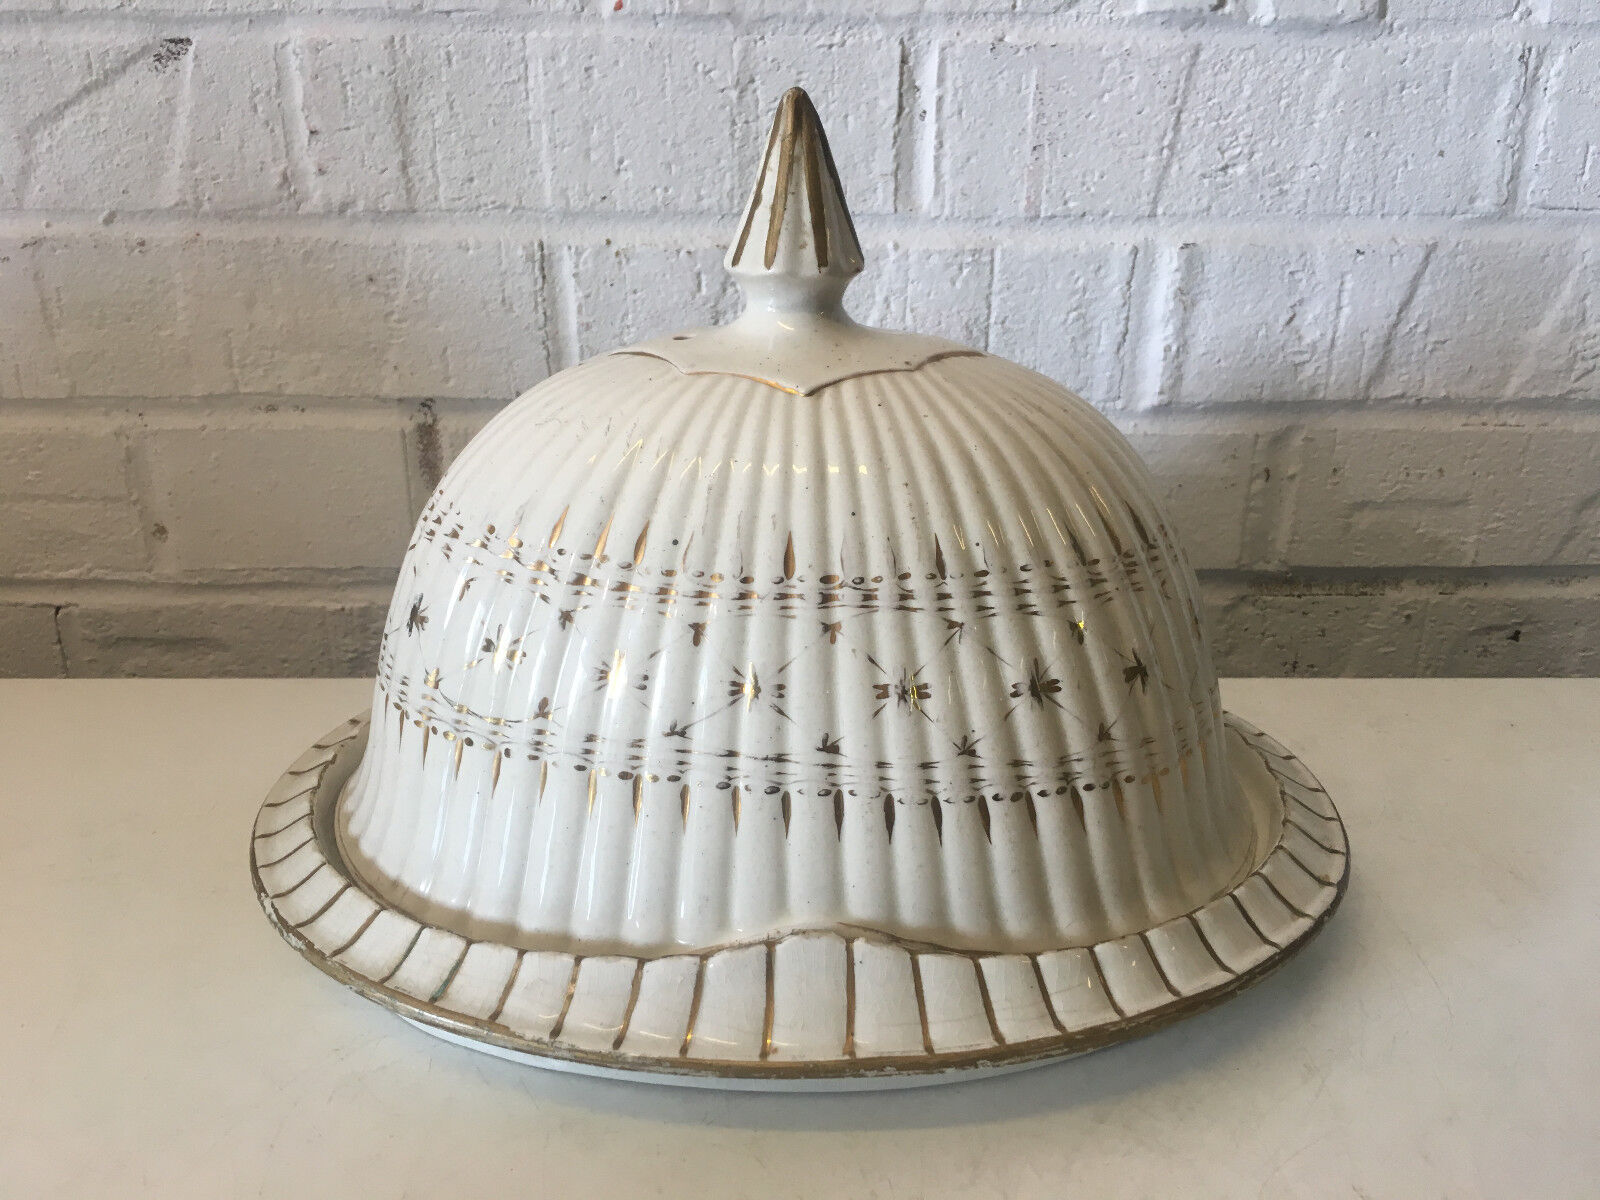 Antique Unusual German / Prussian Helmet Form Ceramic Covered Butter Dish